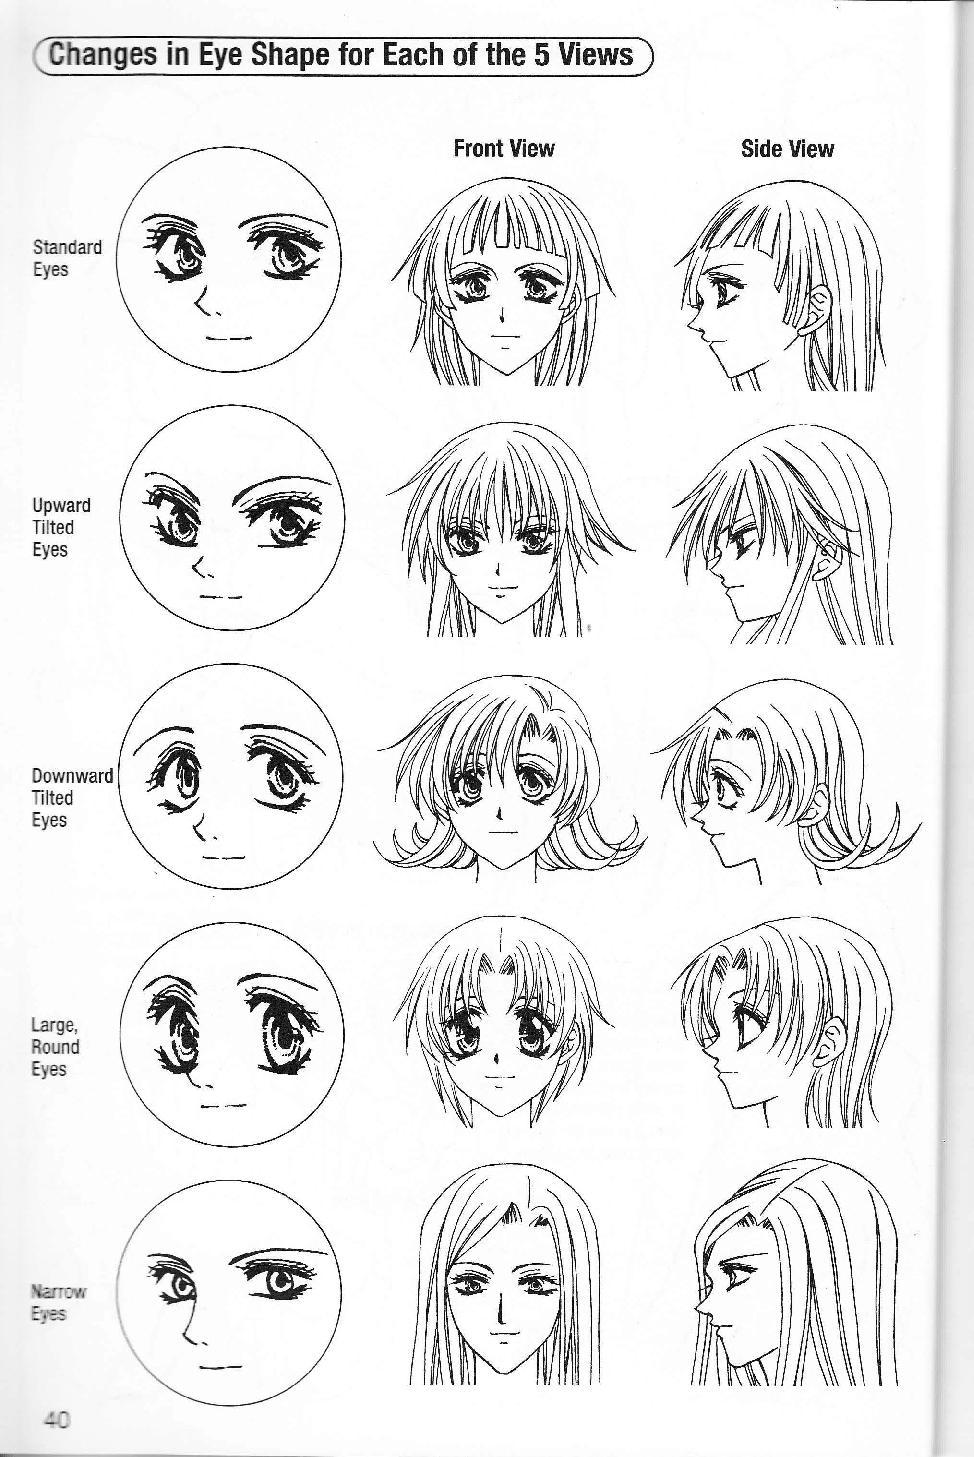 More How to Draw Manga Vol. 2 - Penning Characters 41